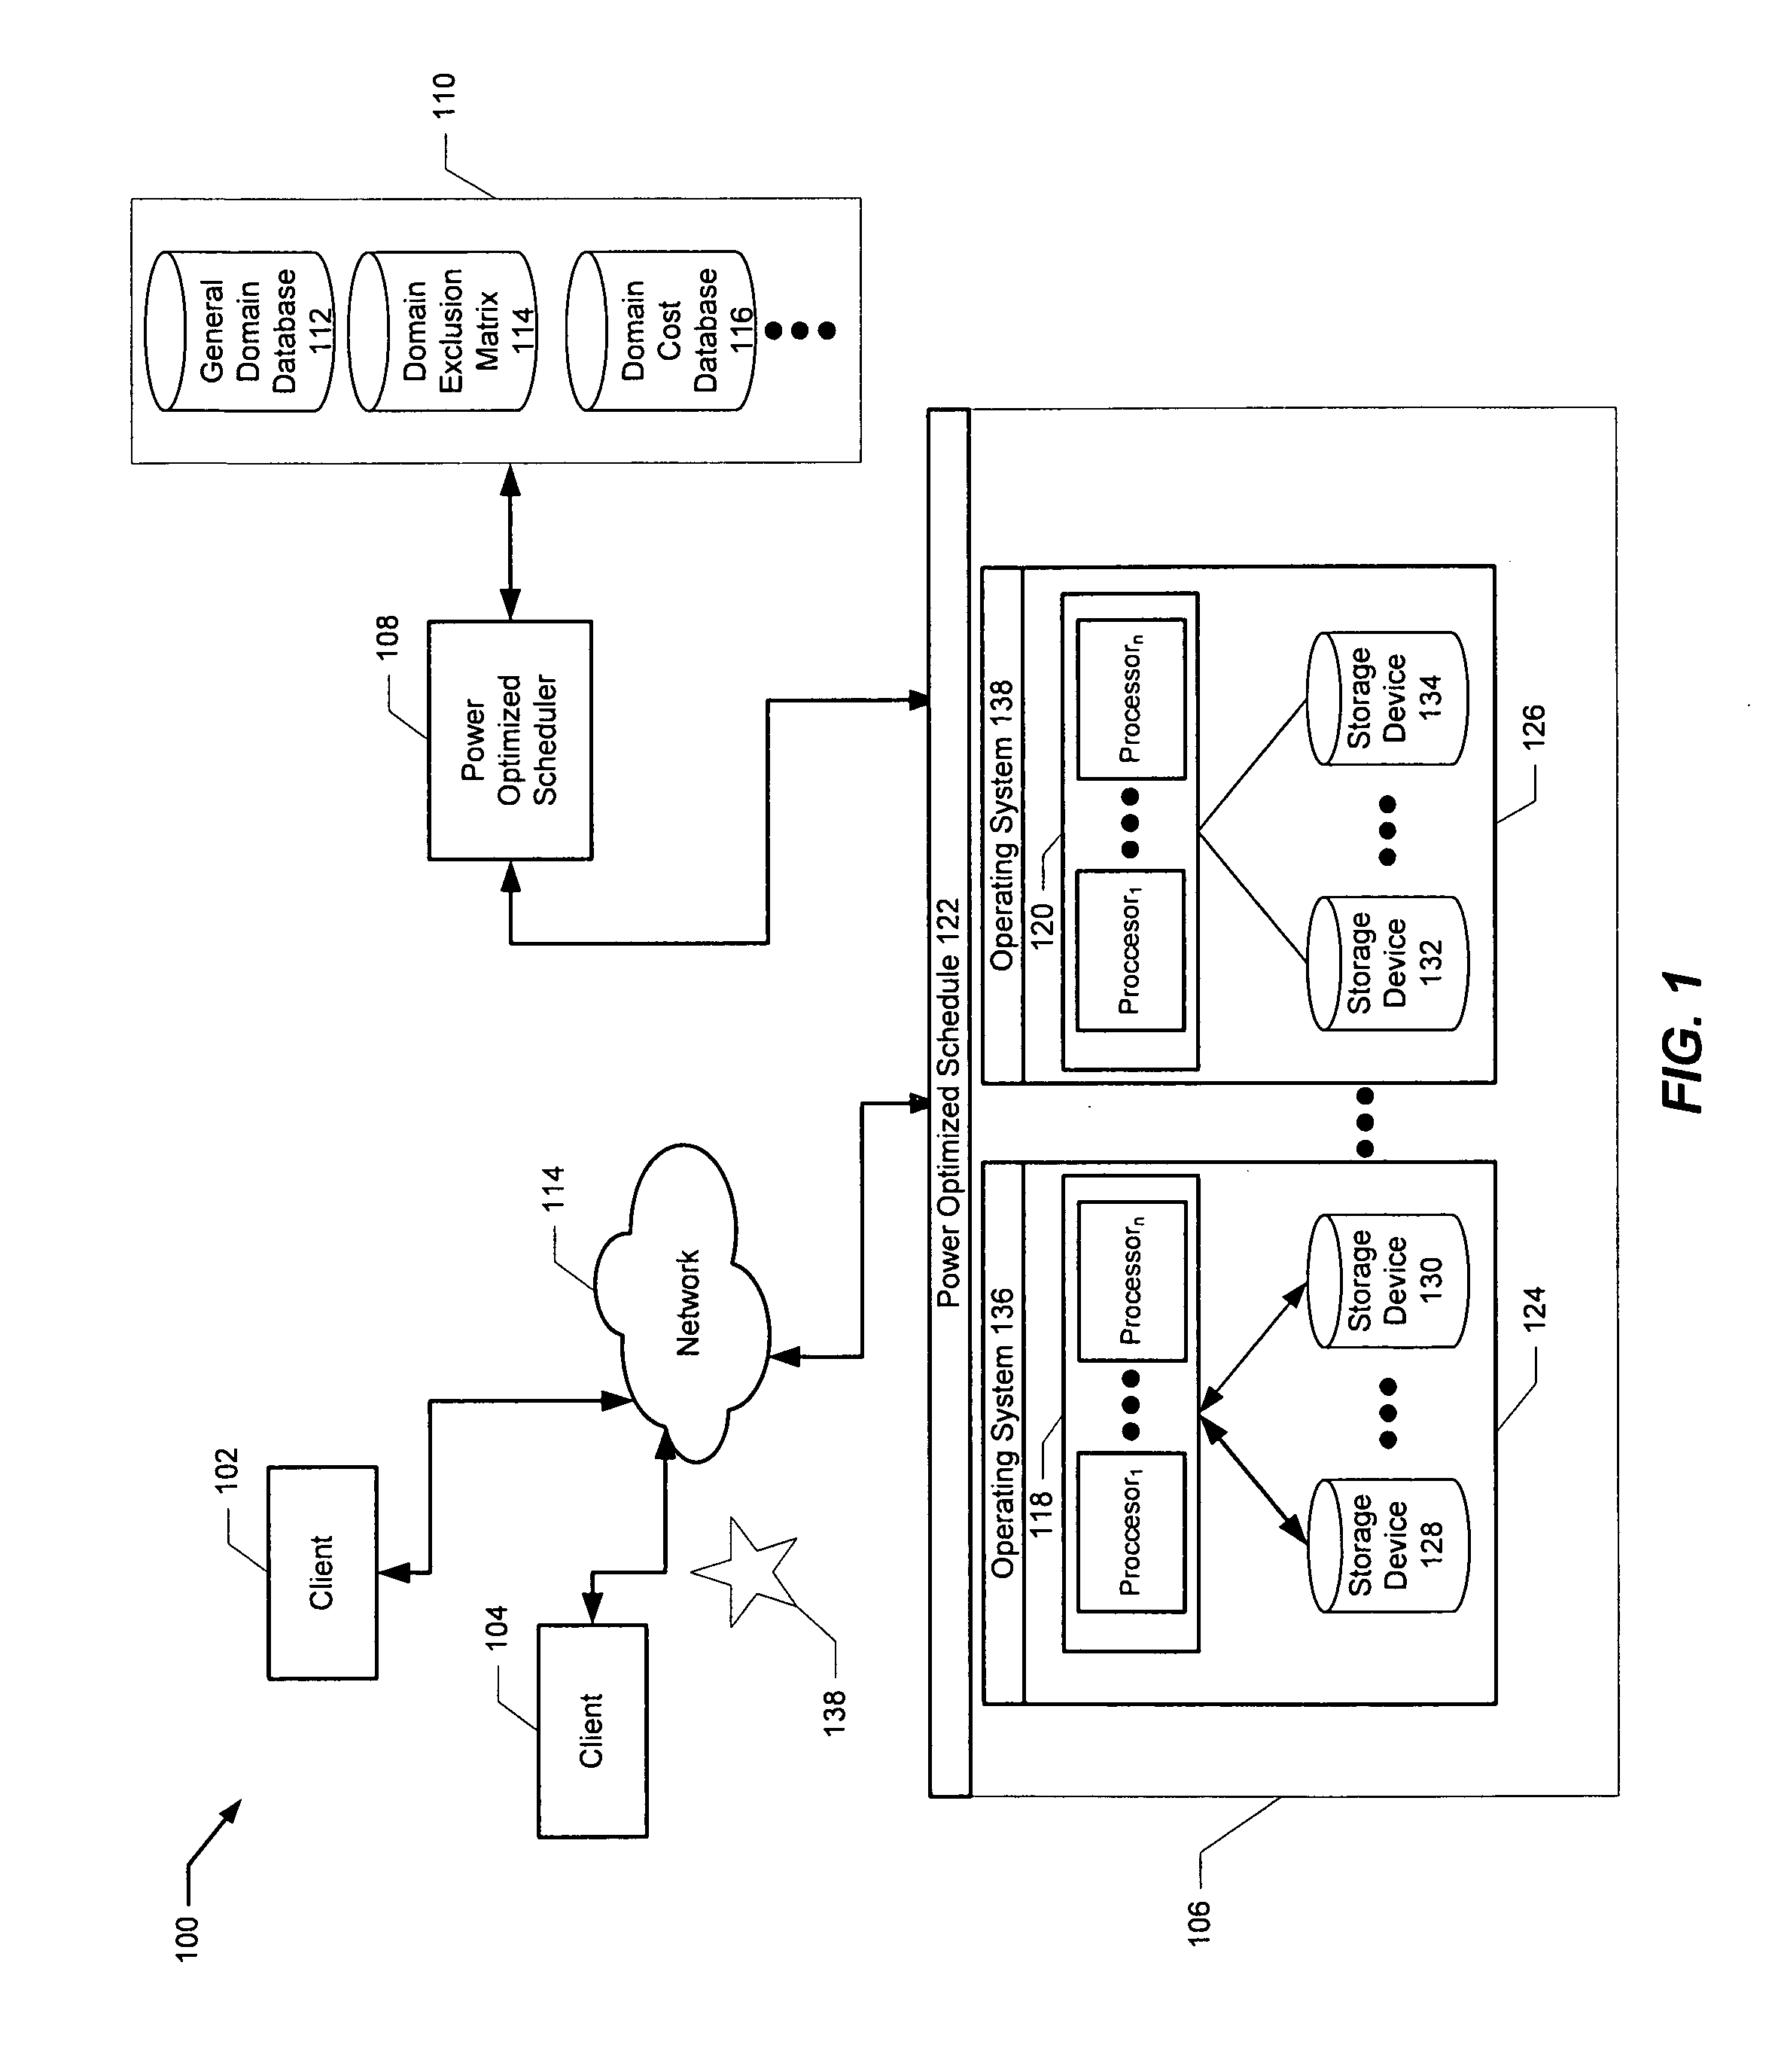 Processor scheduling method and system using domains